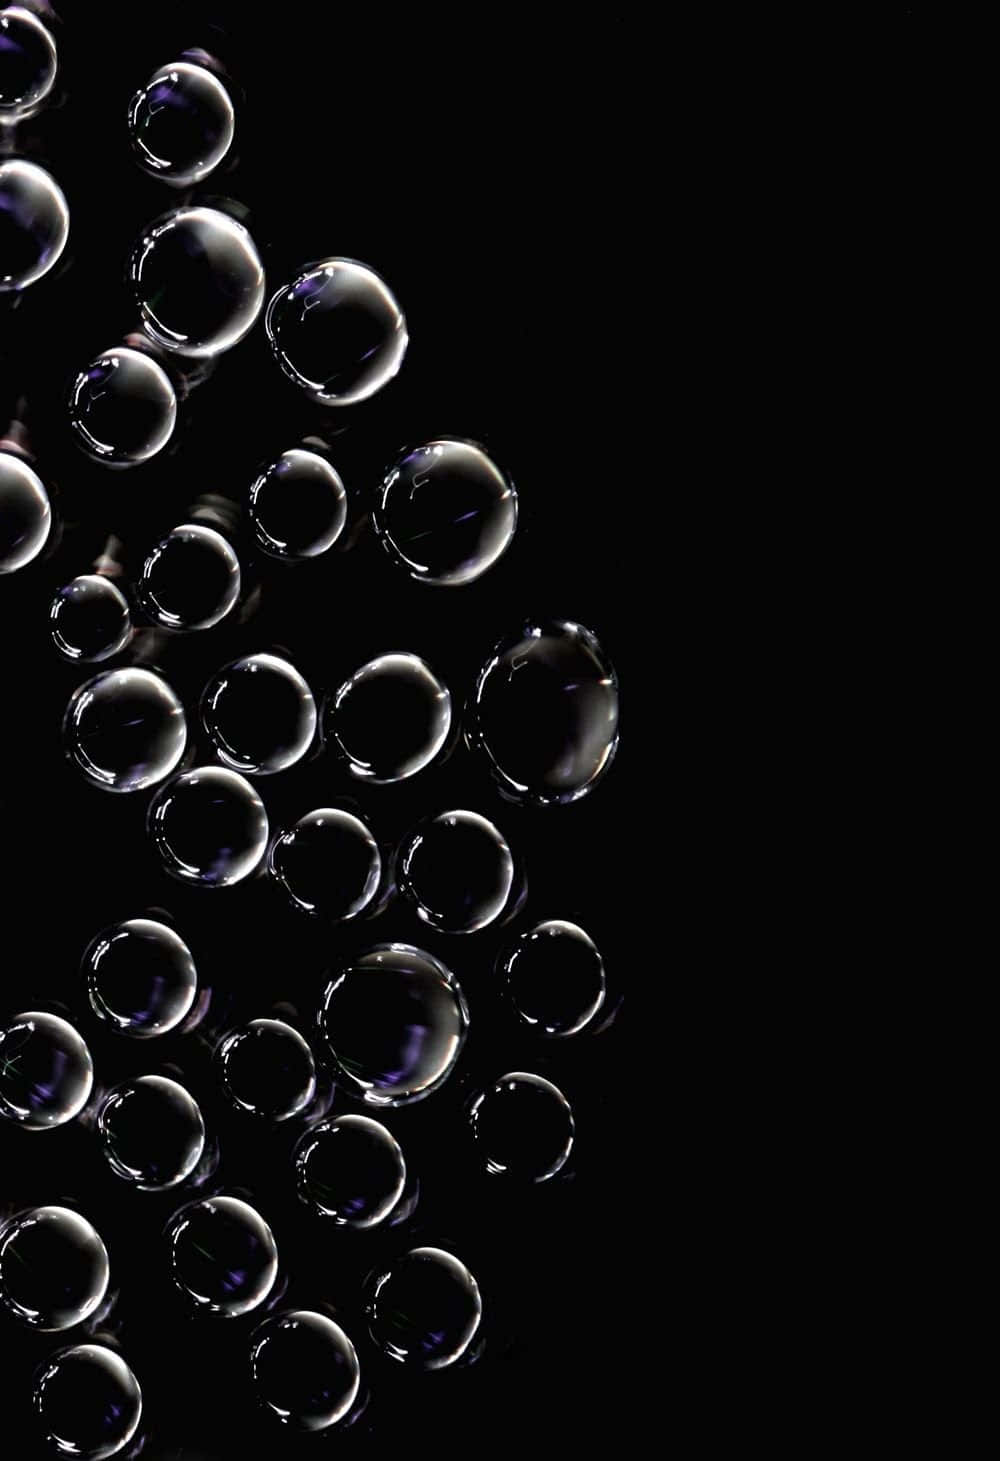 Bubble Background Floating Bubbles On A Dark Surface